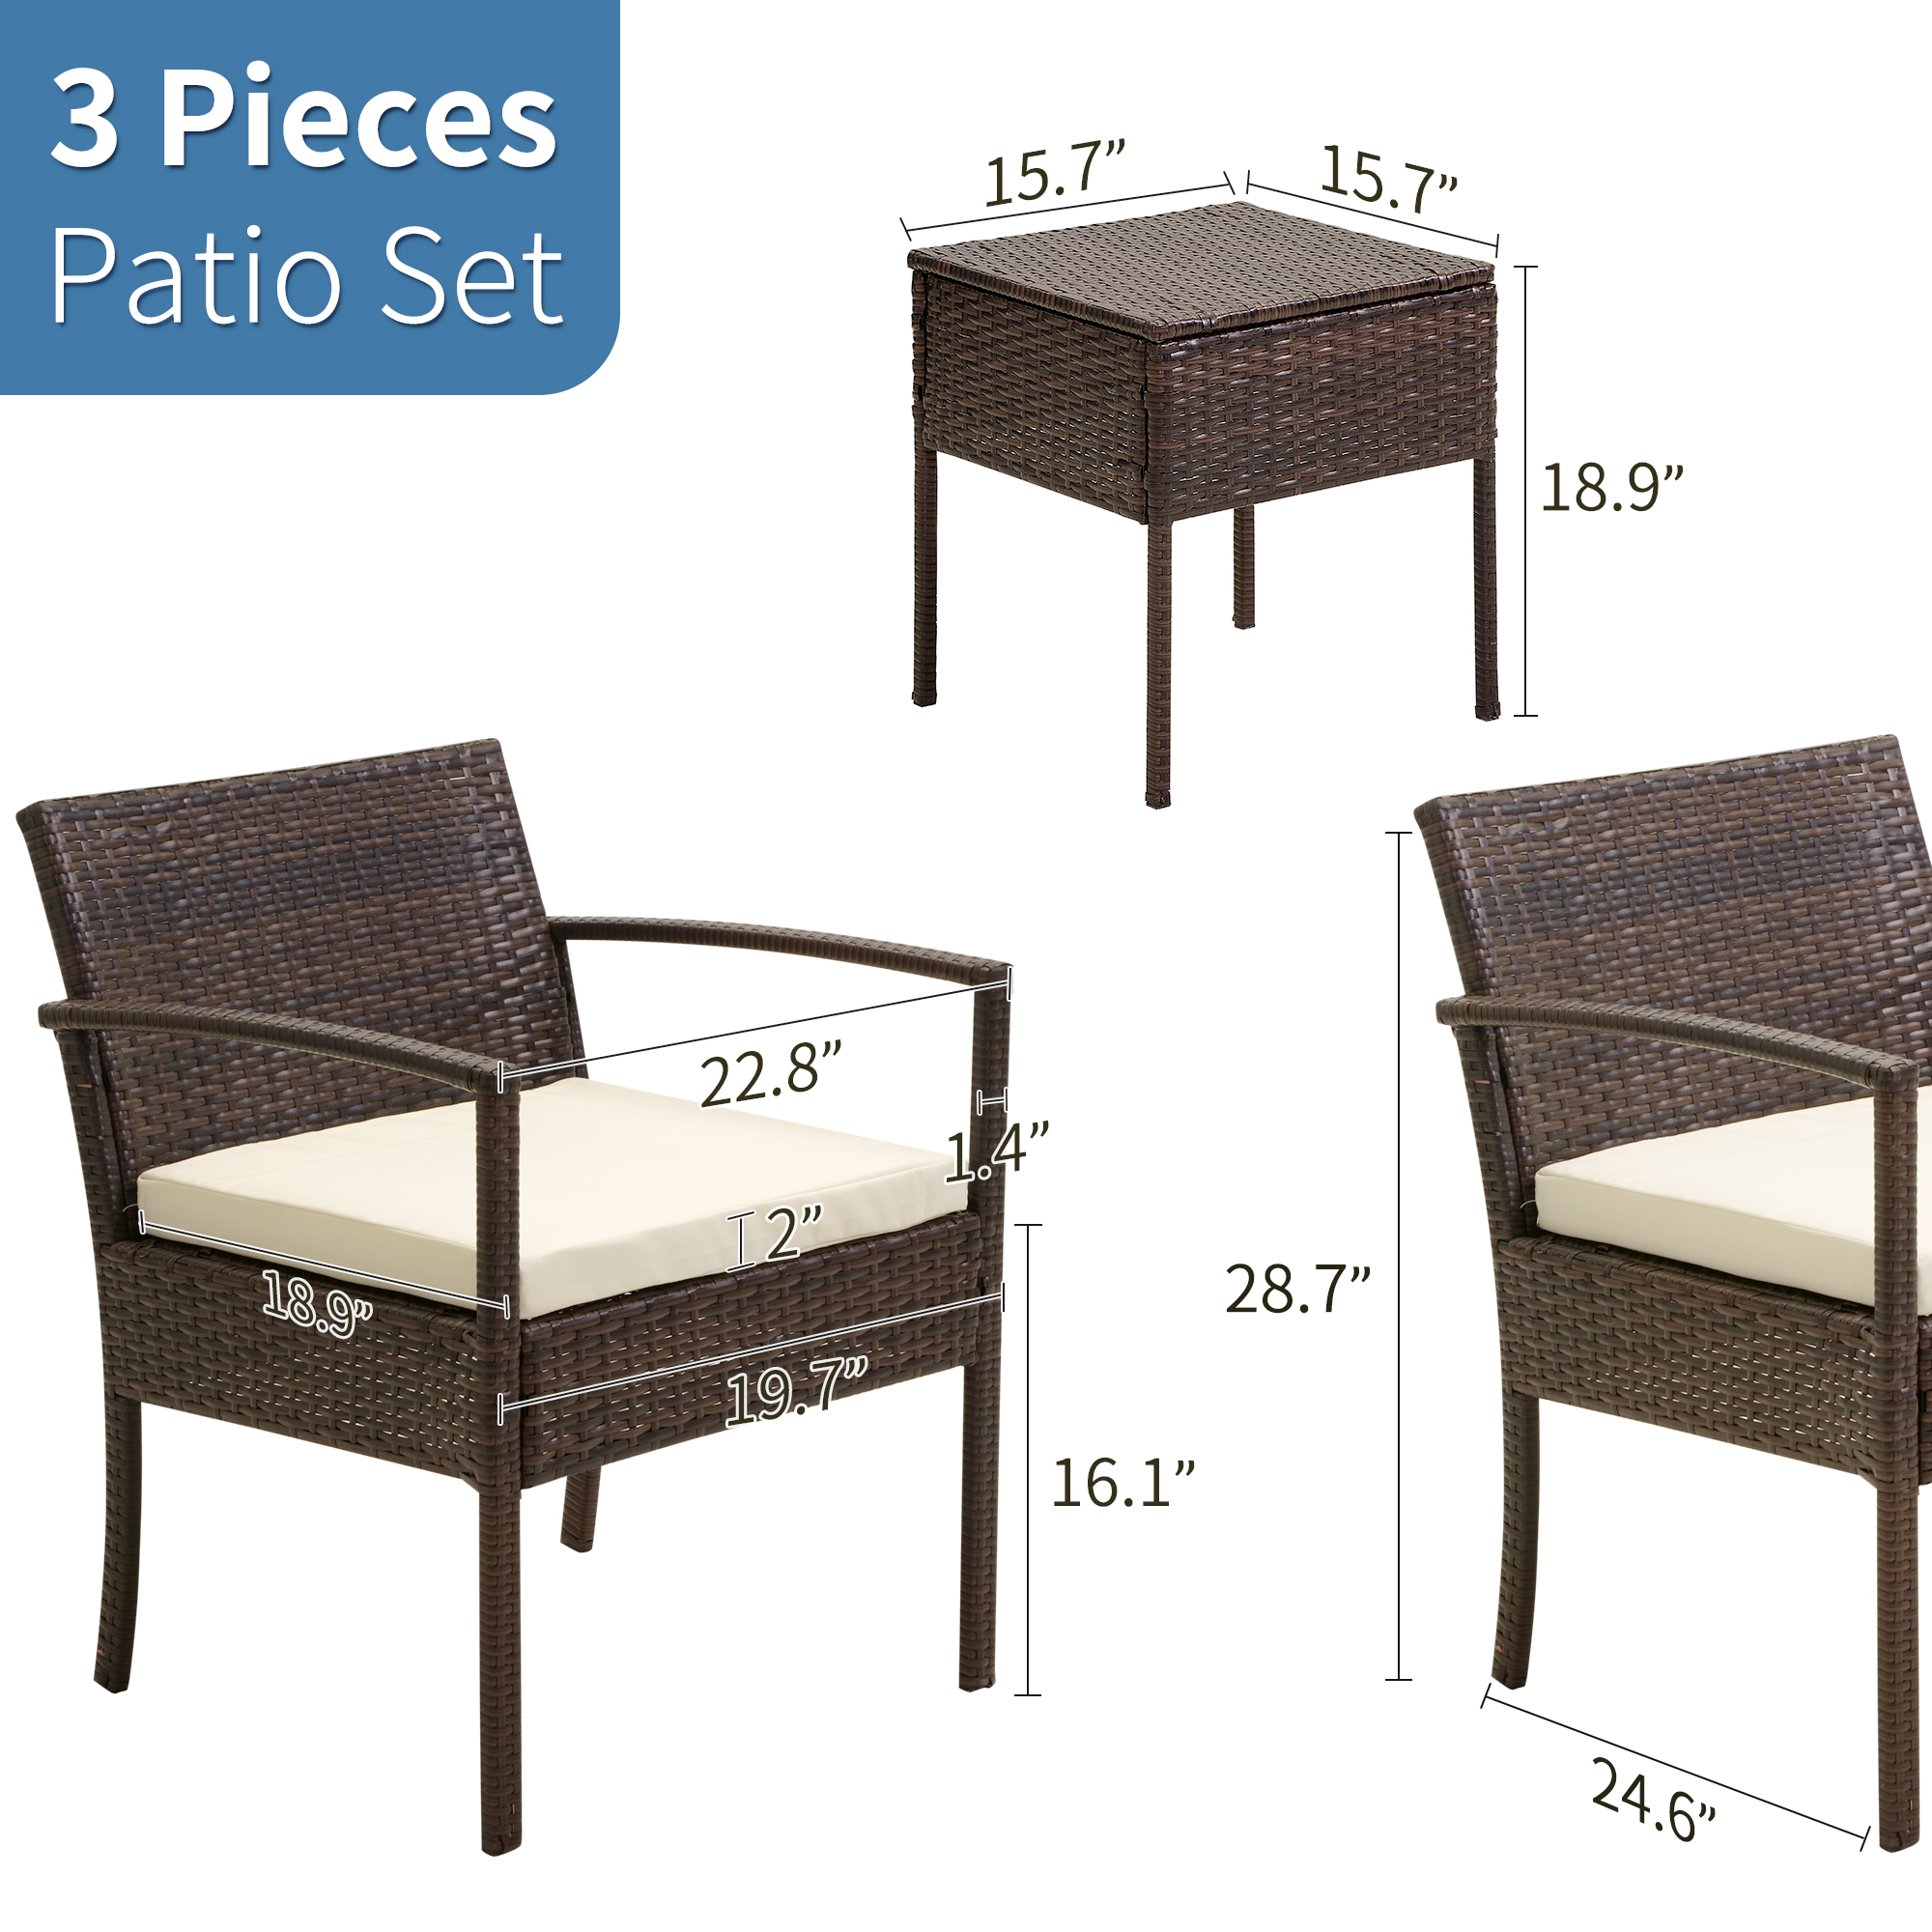 FHFO Patio Furniture Set Outdoor Furniture Outdoor Patio Furniture Set 3 Pieces Patio Conversation Set Table and Chairs with Cushions for Garden Balcony Backyard Porch Lawn Brown Rattan White Cushion - image 2 of 6